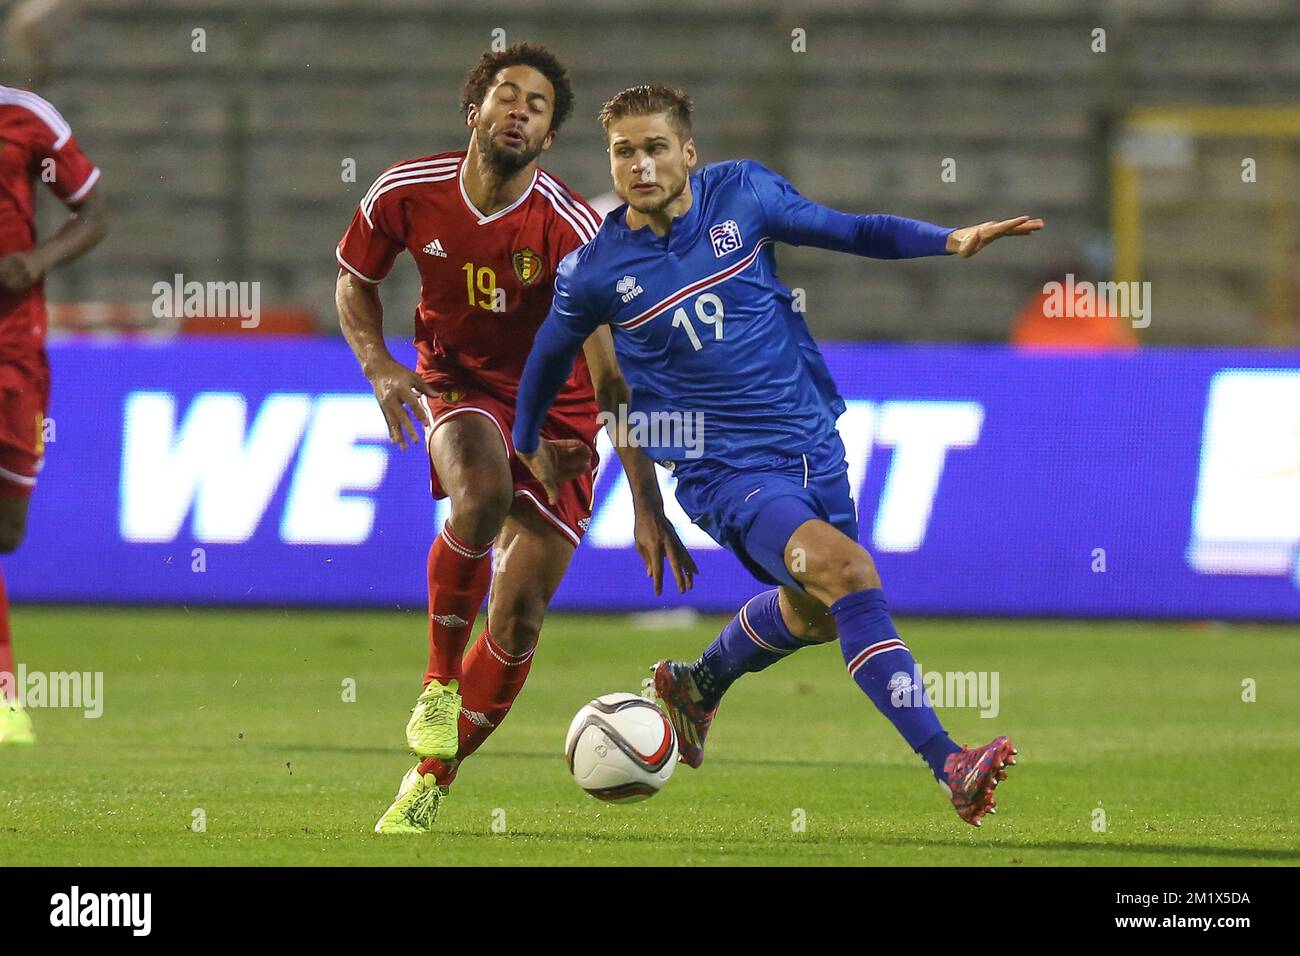 20141112 - BRUSSELS, BELGIUM: Belgium's Moussa Dembele and Iceland's Rurik Gislason fight for the ball during a friendly game of Belgian national soccer team Red Devils and Iceland national team, in the King Baudouin stadium (Boudewijnstadion/ Stade Roi Baudouin) in Brussels, Wednesday 12 November 2014. BELGA PHOTO BRUNO FAHY Stock Photo